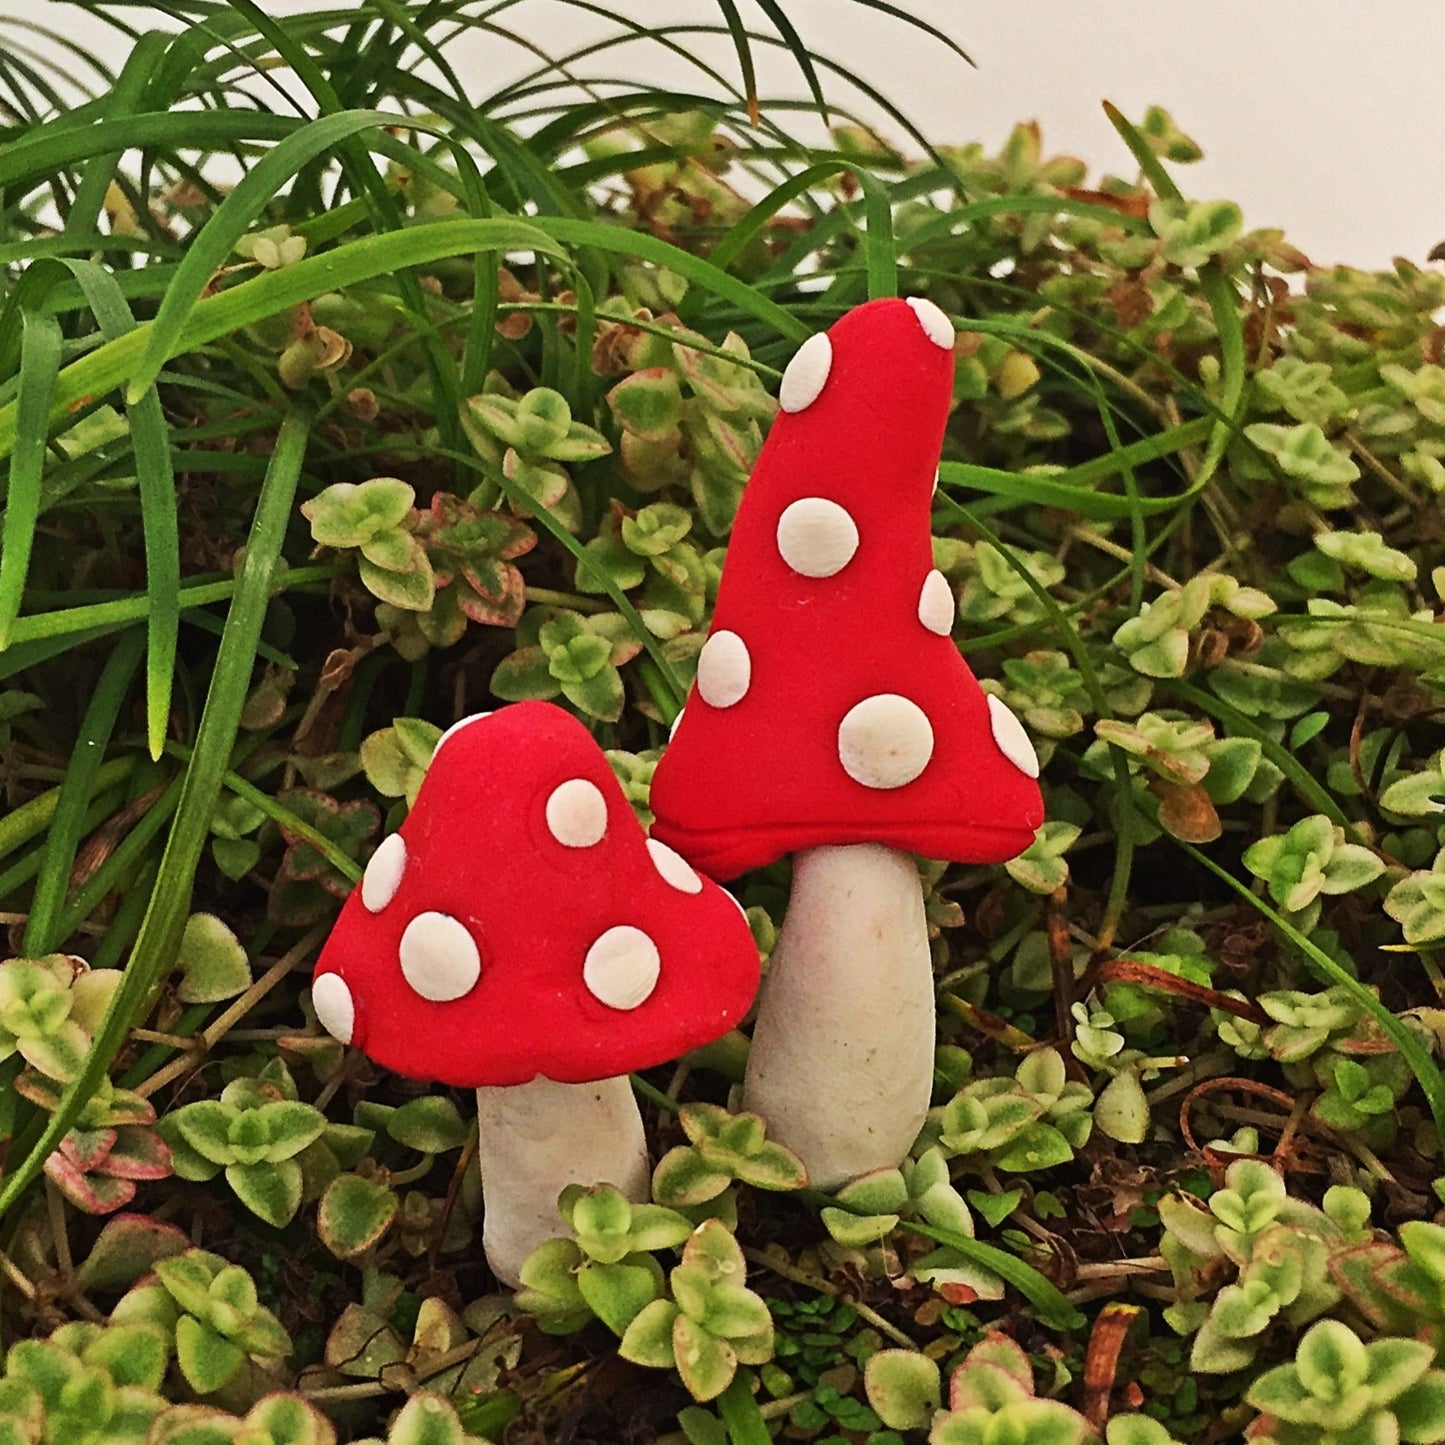 Fairy Garden Red and White whimsical Mushrooms